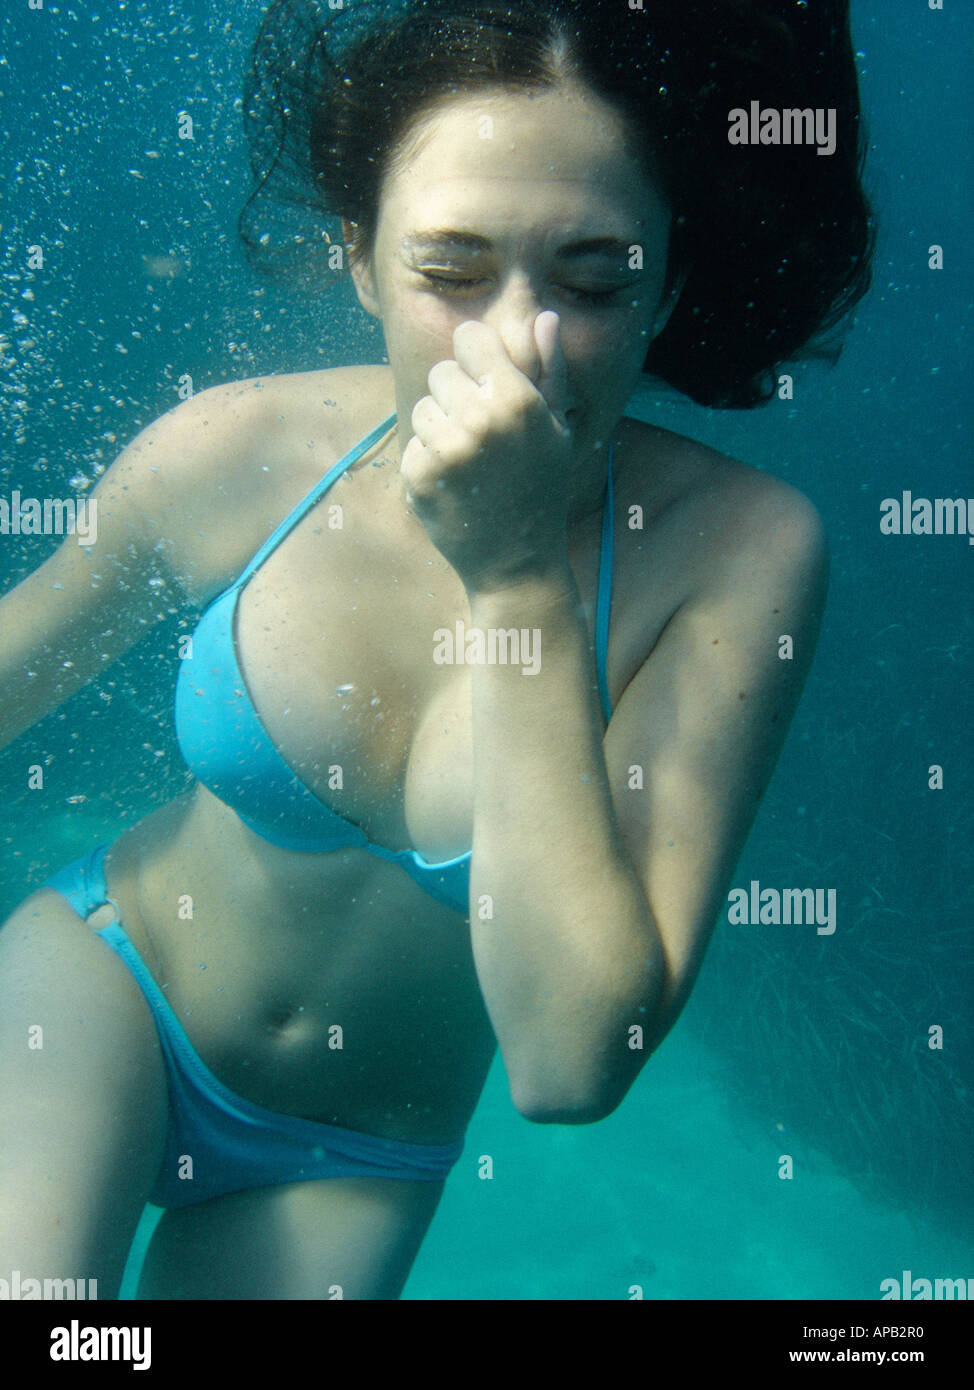 Underwater Girl High Resolution Stock Photography and Images - Alamy